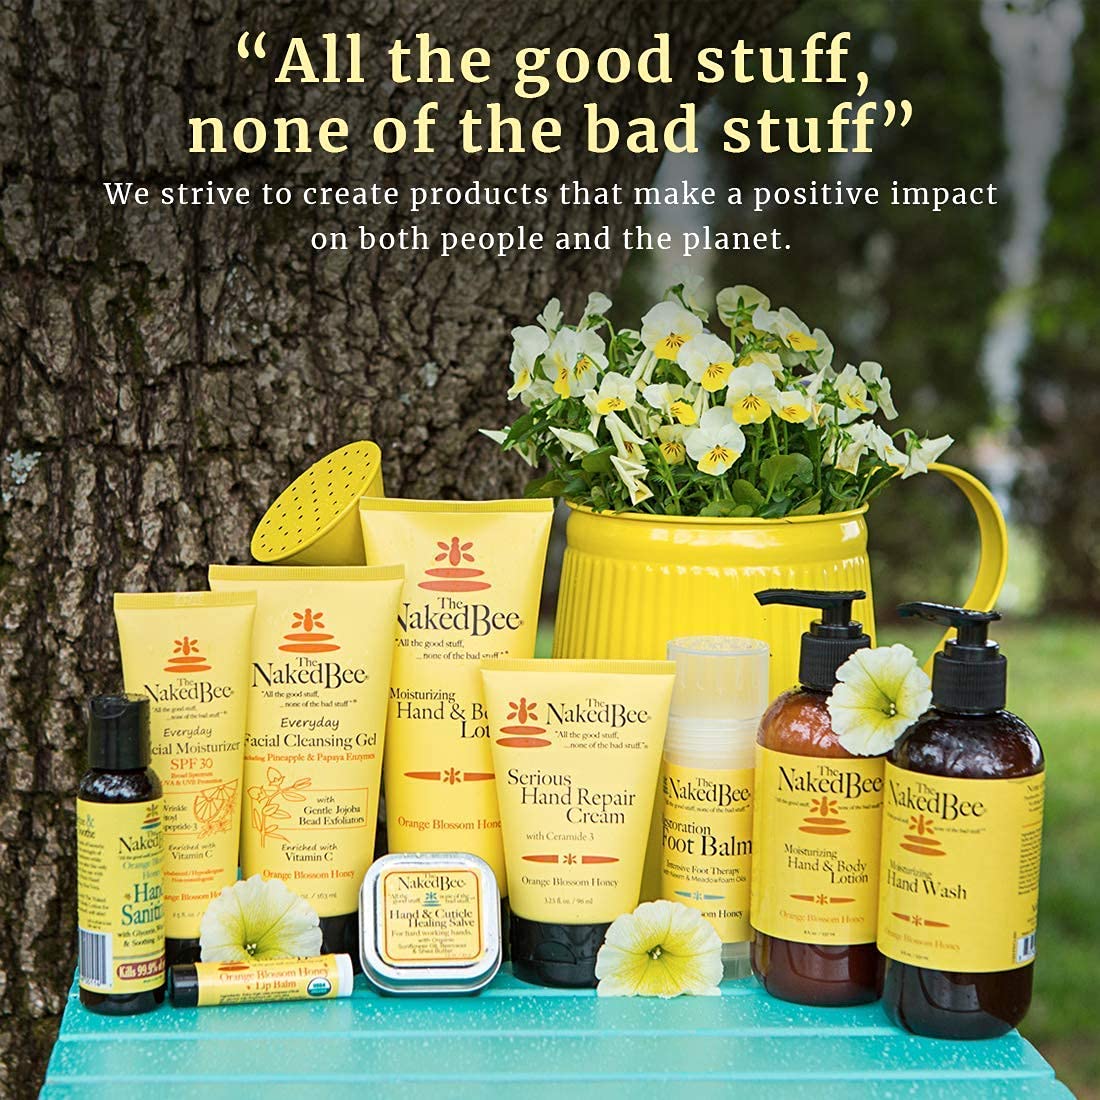 The Naked Bee Blossom Honey Restoration Foot Balm 2oz + Hand and Body Lotion 6.7oz+ Serious Hand Repair Cream Lotion